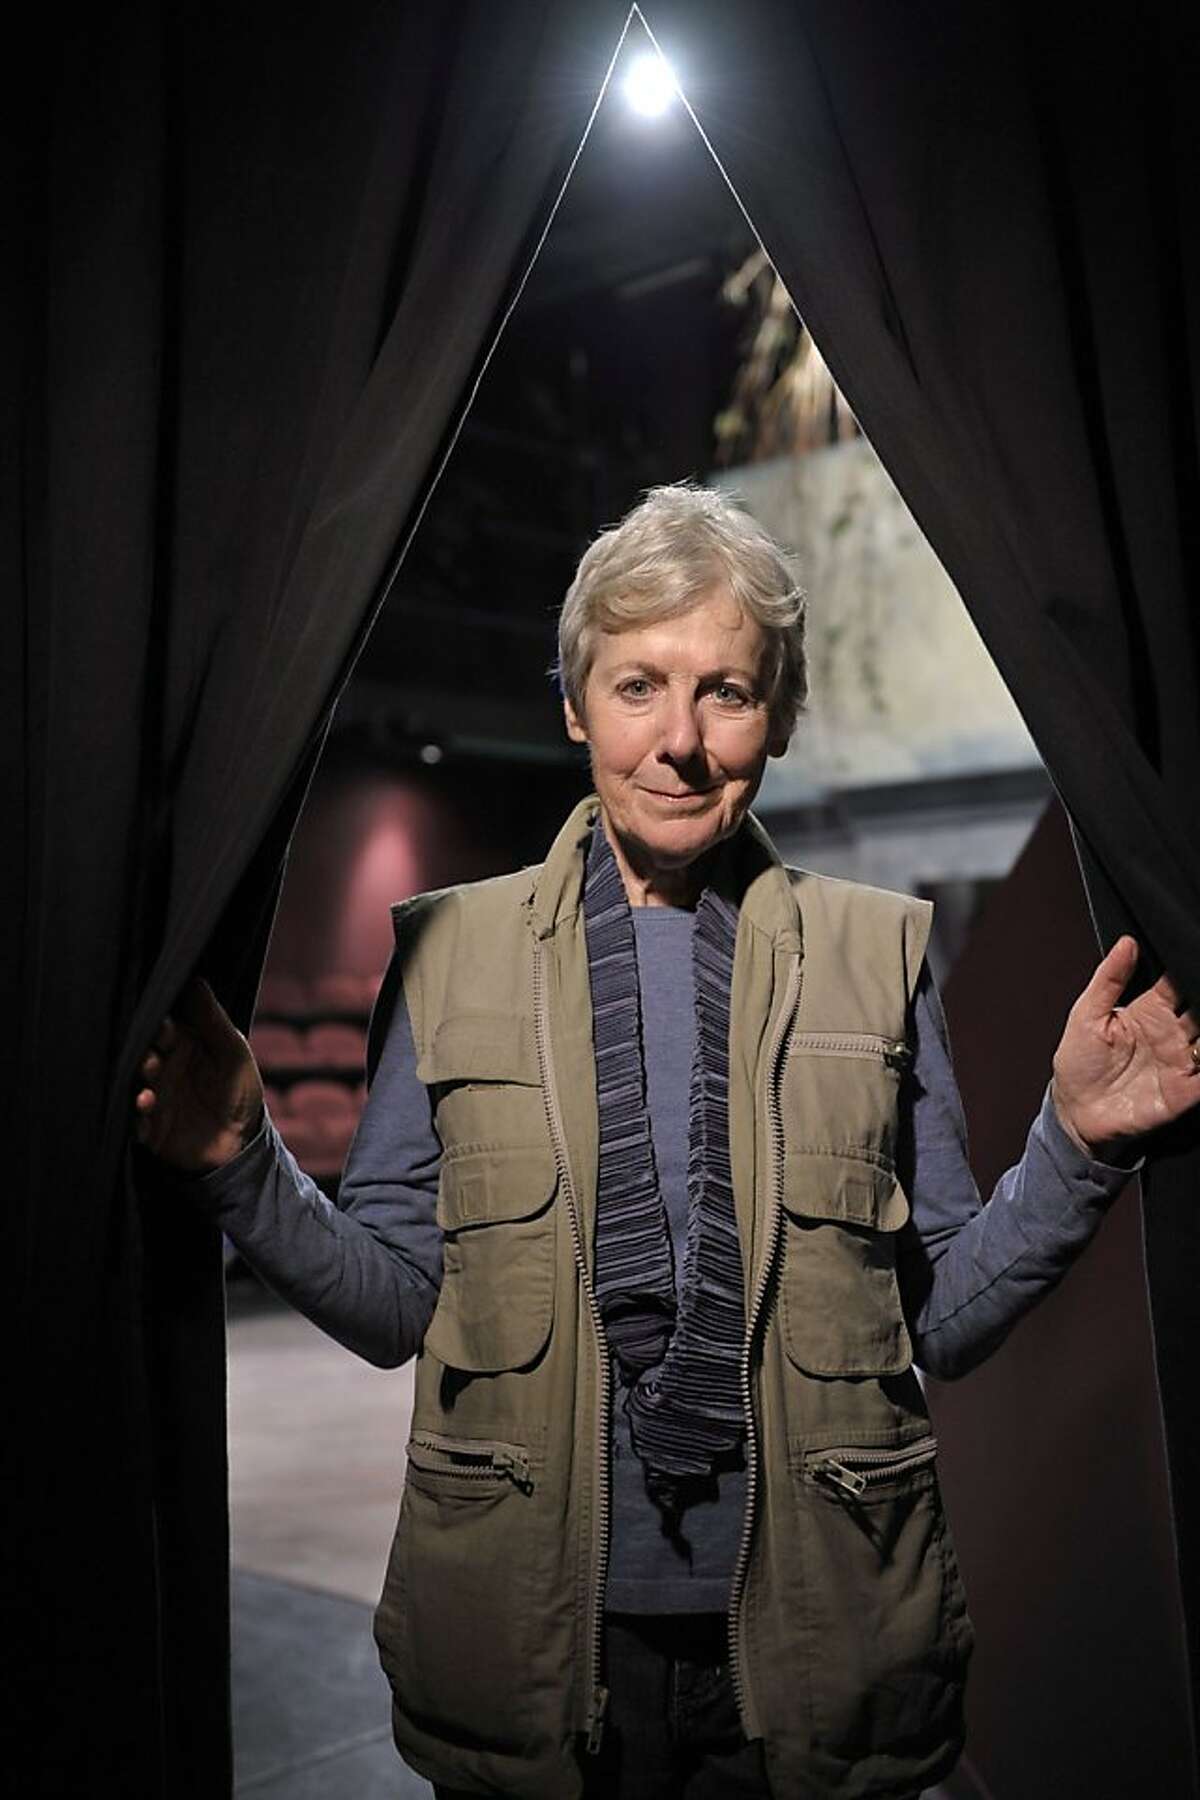 Veteran Bay Area actor and director Joy Carlin has had a busy year. She's got a juicy scene in Woody Allen's "Blue Jasmine," she performed in MarinTheatre Company's acclaimed "Beauty Queen of Leenane" and she's directing Aurora Theatre Company's season-opener, "After the Revolution," through Sept. 29. Photo by David Allen